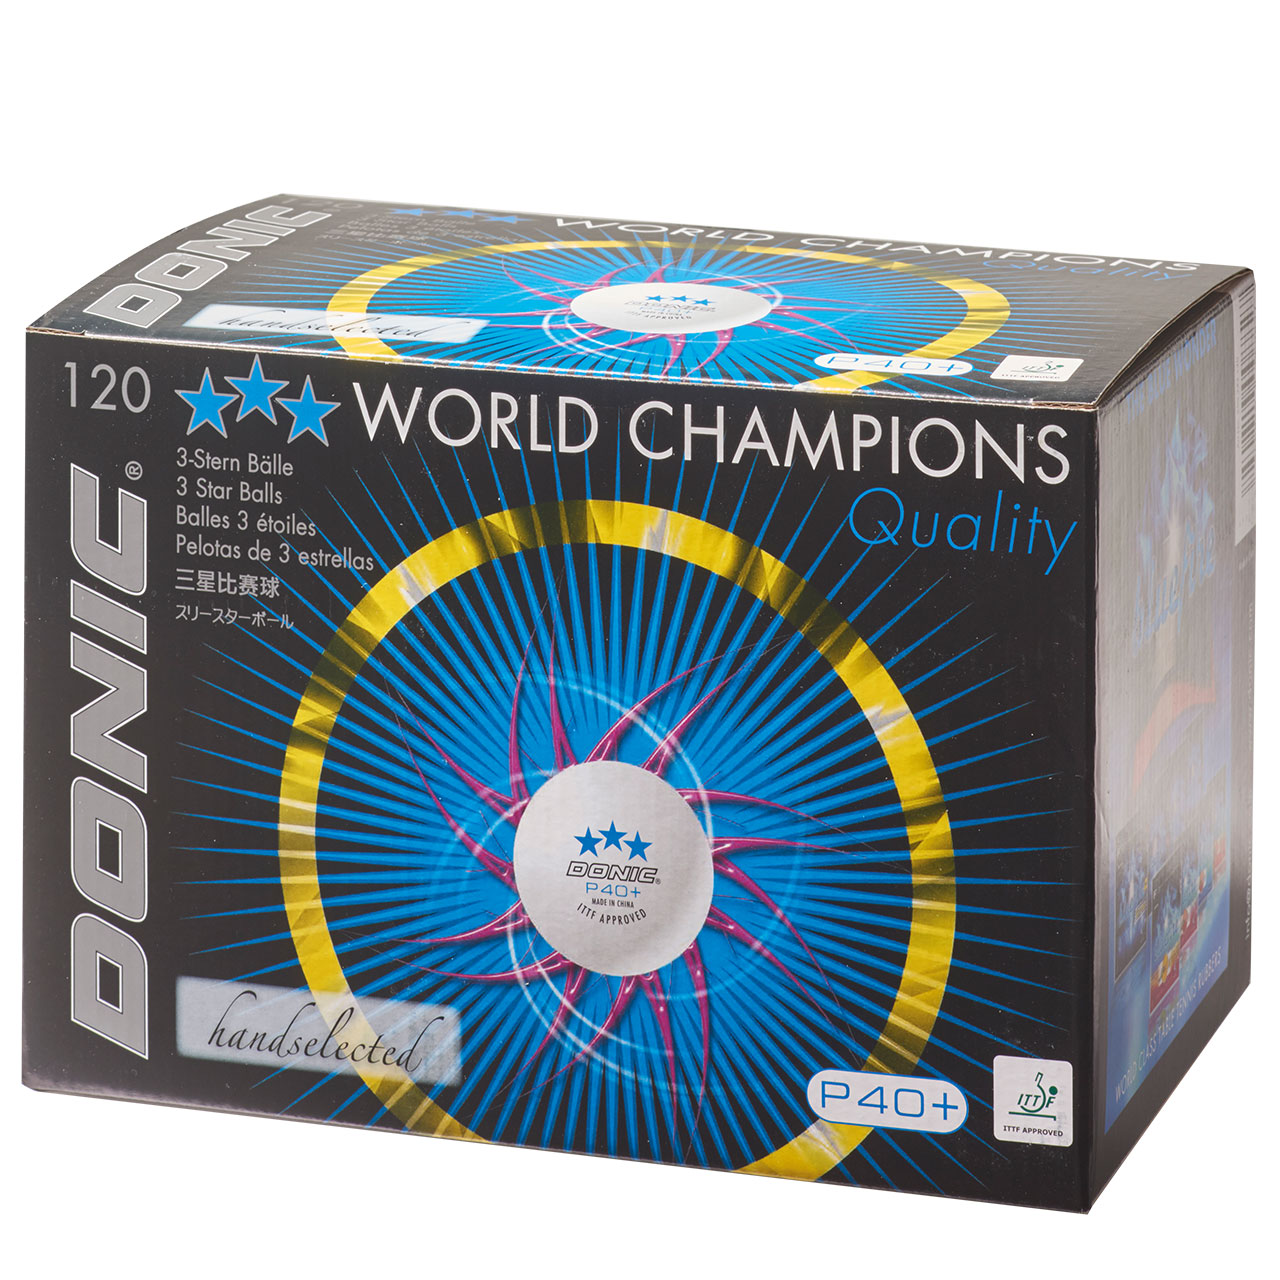 DONIC Table Tennis Balls P40+ *** Cell-Free Box of 120